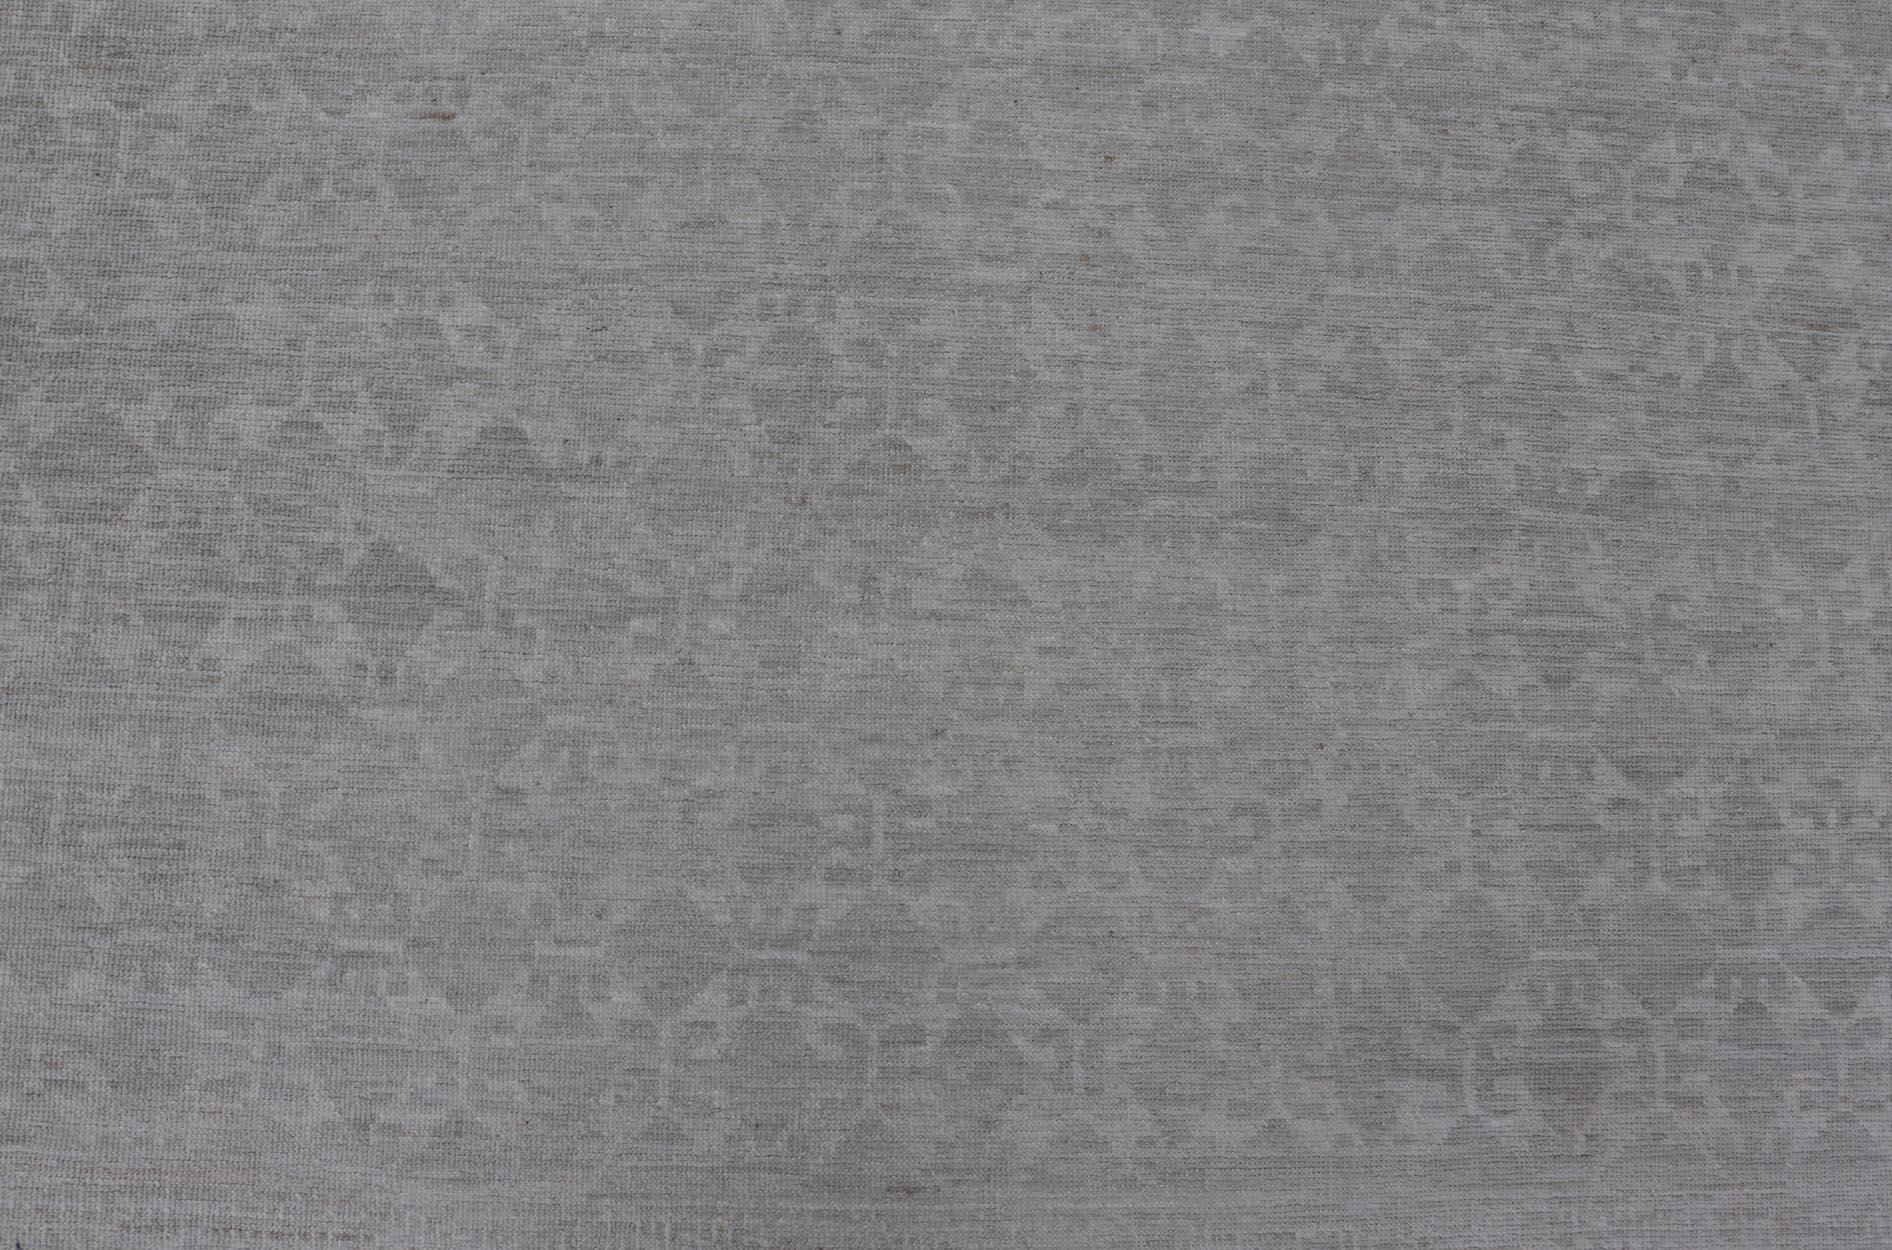 Modern All-Over Tribal Motif Khotan Area Rug in Muted Gray and Cream Tones For Sale 2